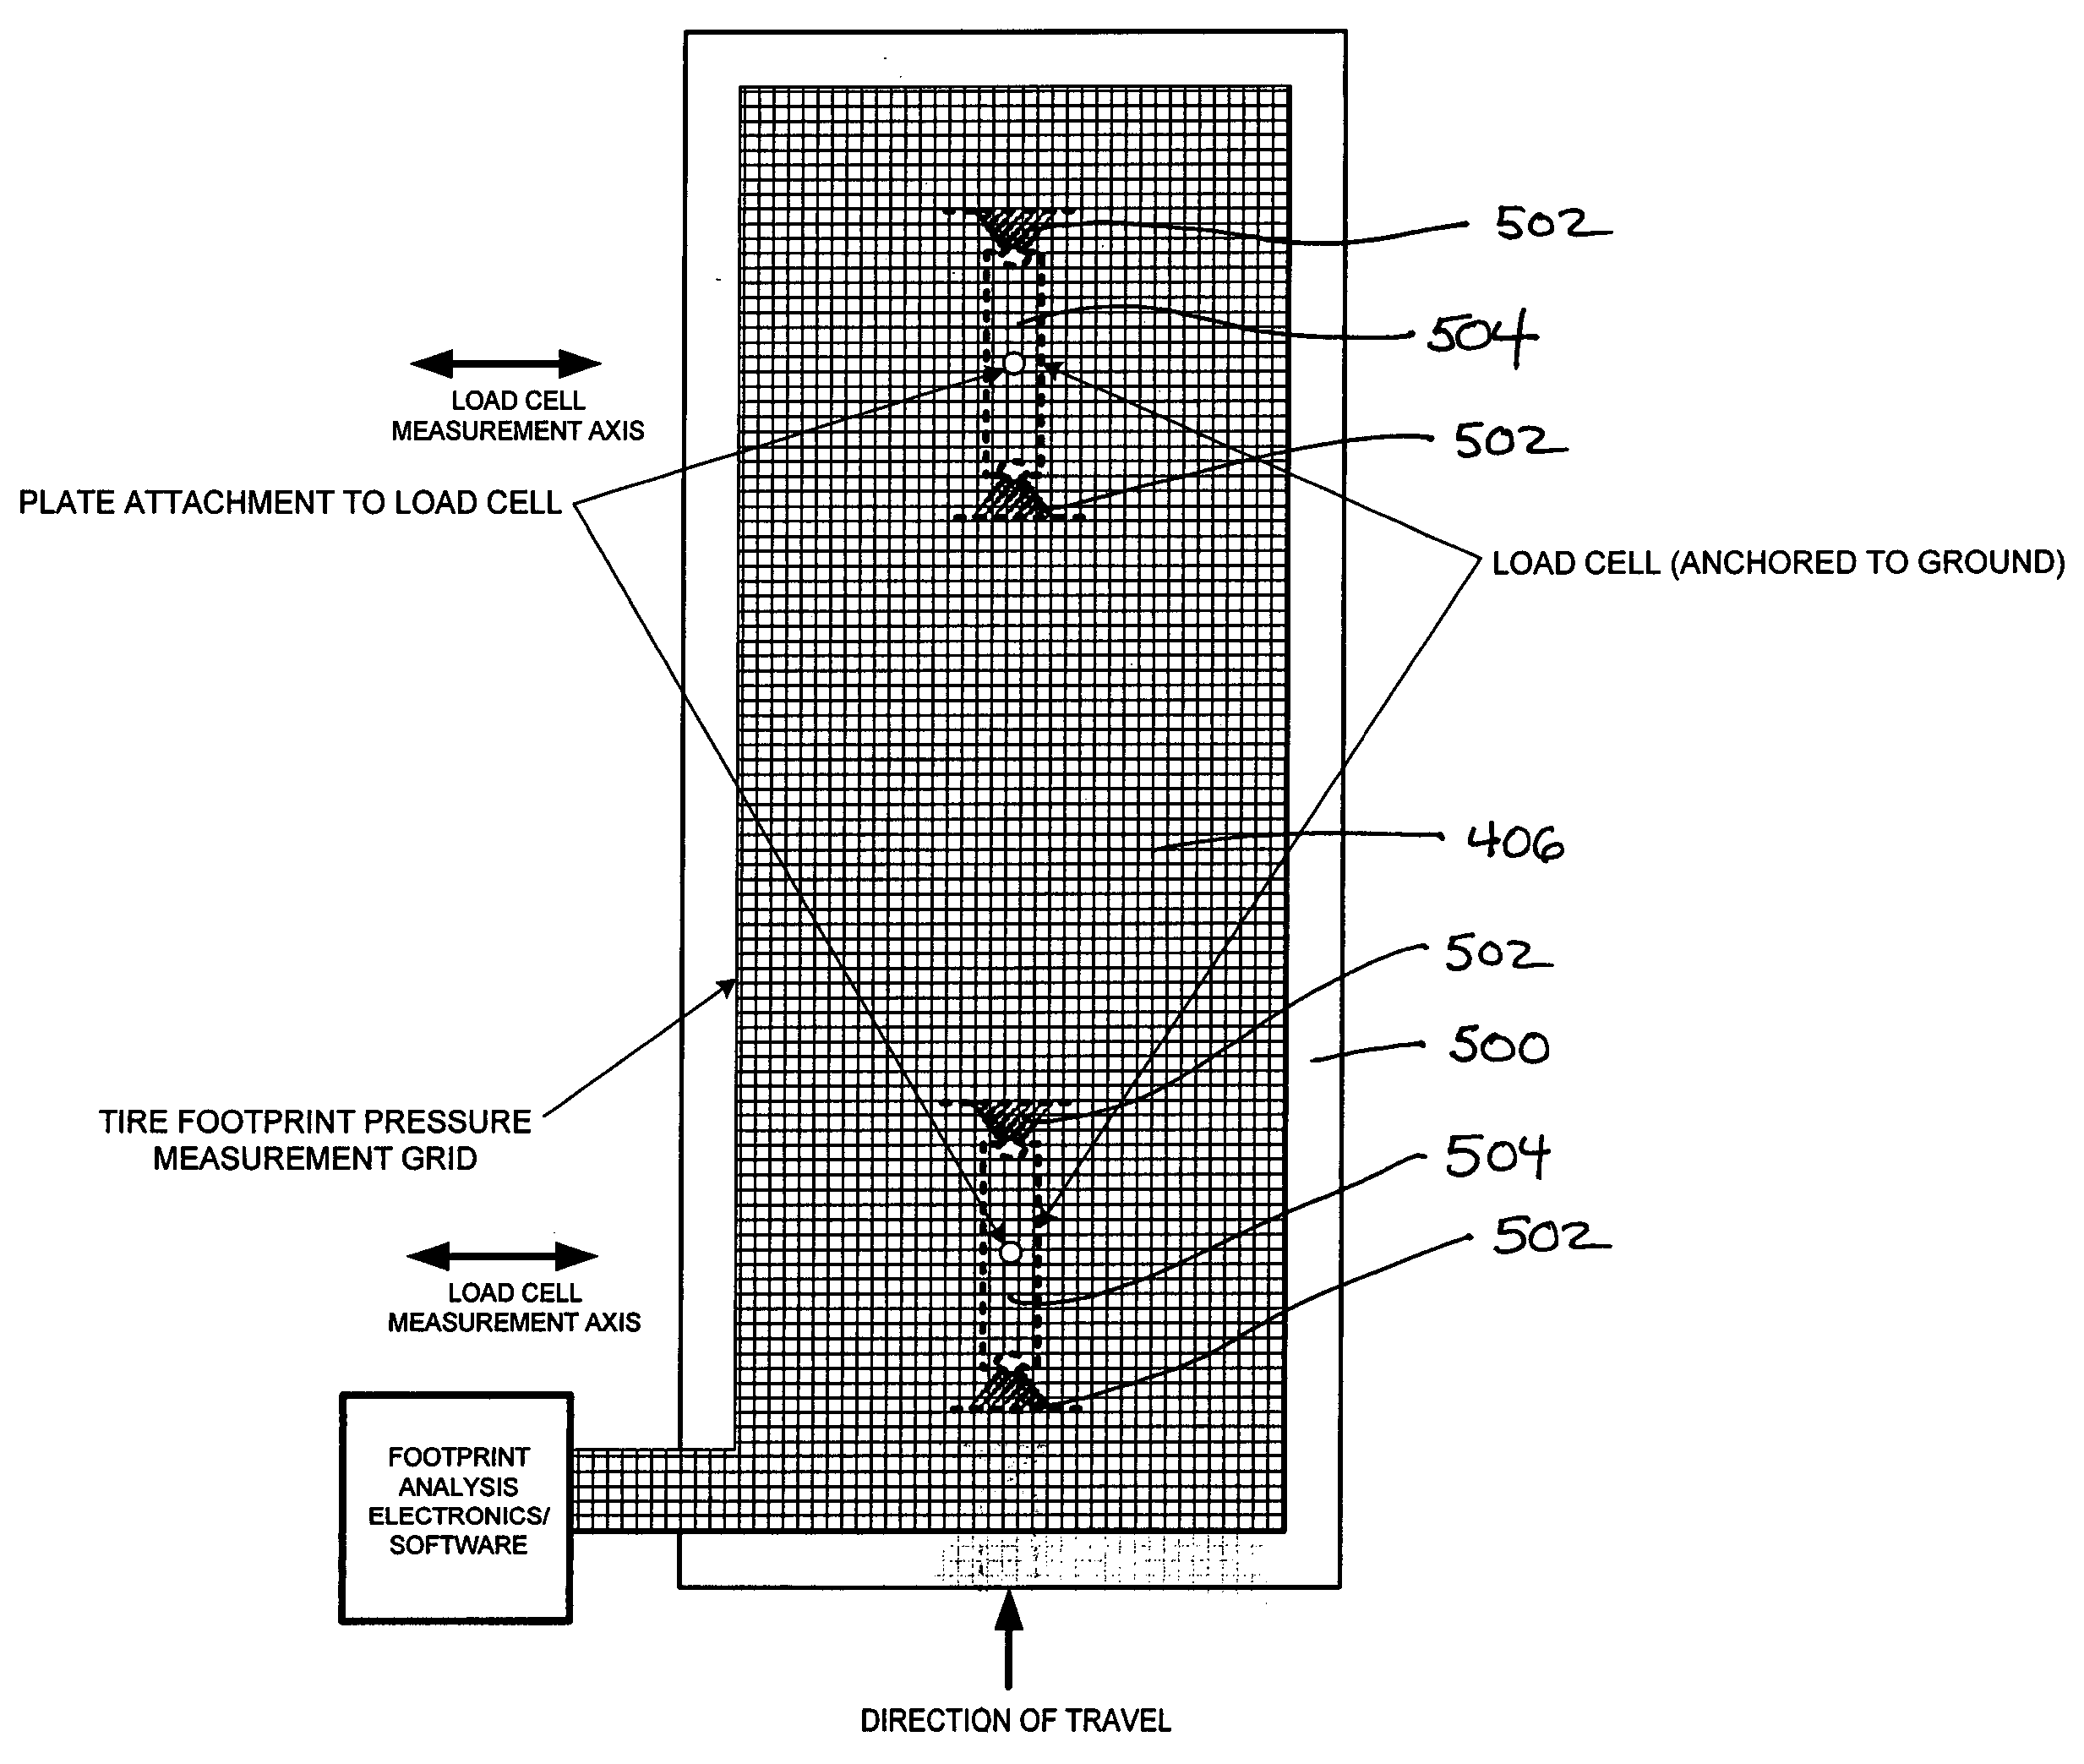 Methods for measuring alignment in customized vehicles